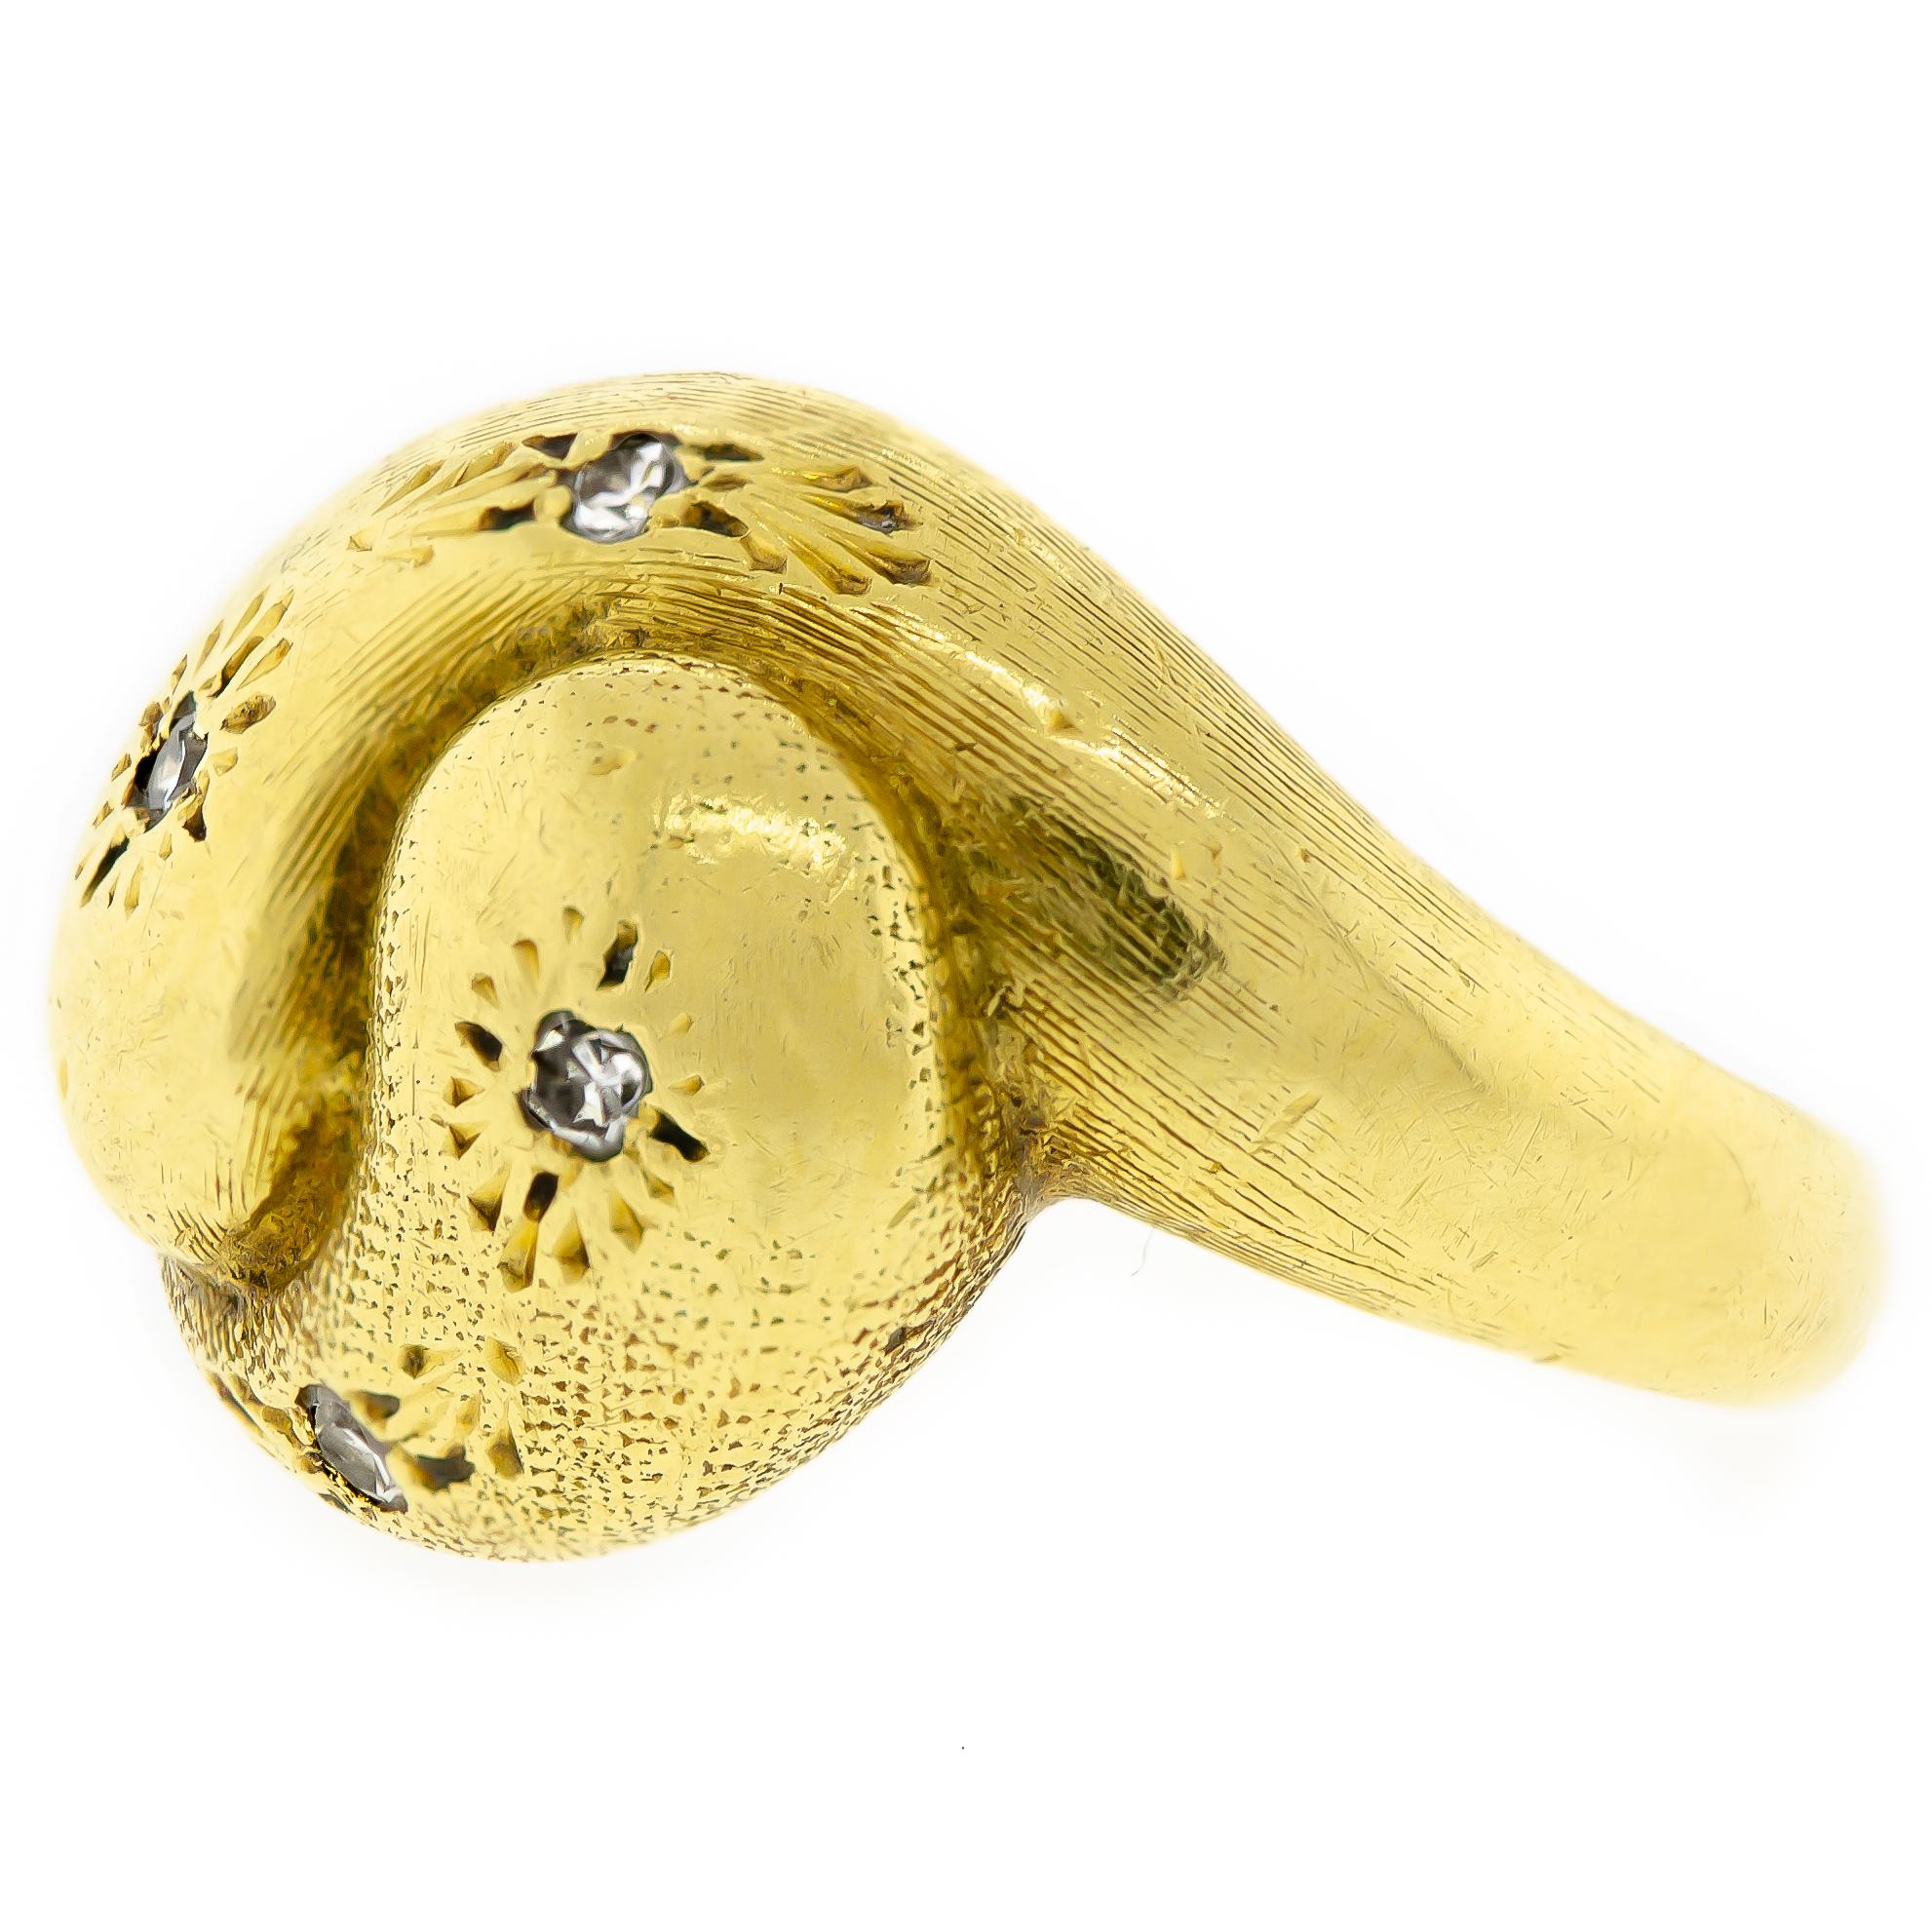 Sharp circa 1930's diamond and 18kt yellow gold double snake ring. This striking ring contains 4 small sparkling single cut diamonds set into a star cut pattern on the face of the modified double snake ring. Lovely elegant engraved details cover